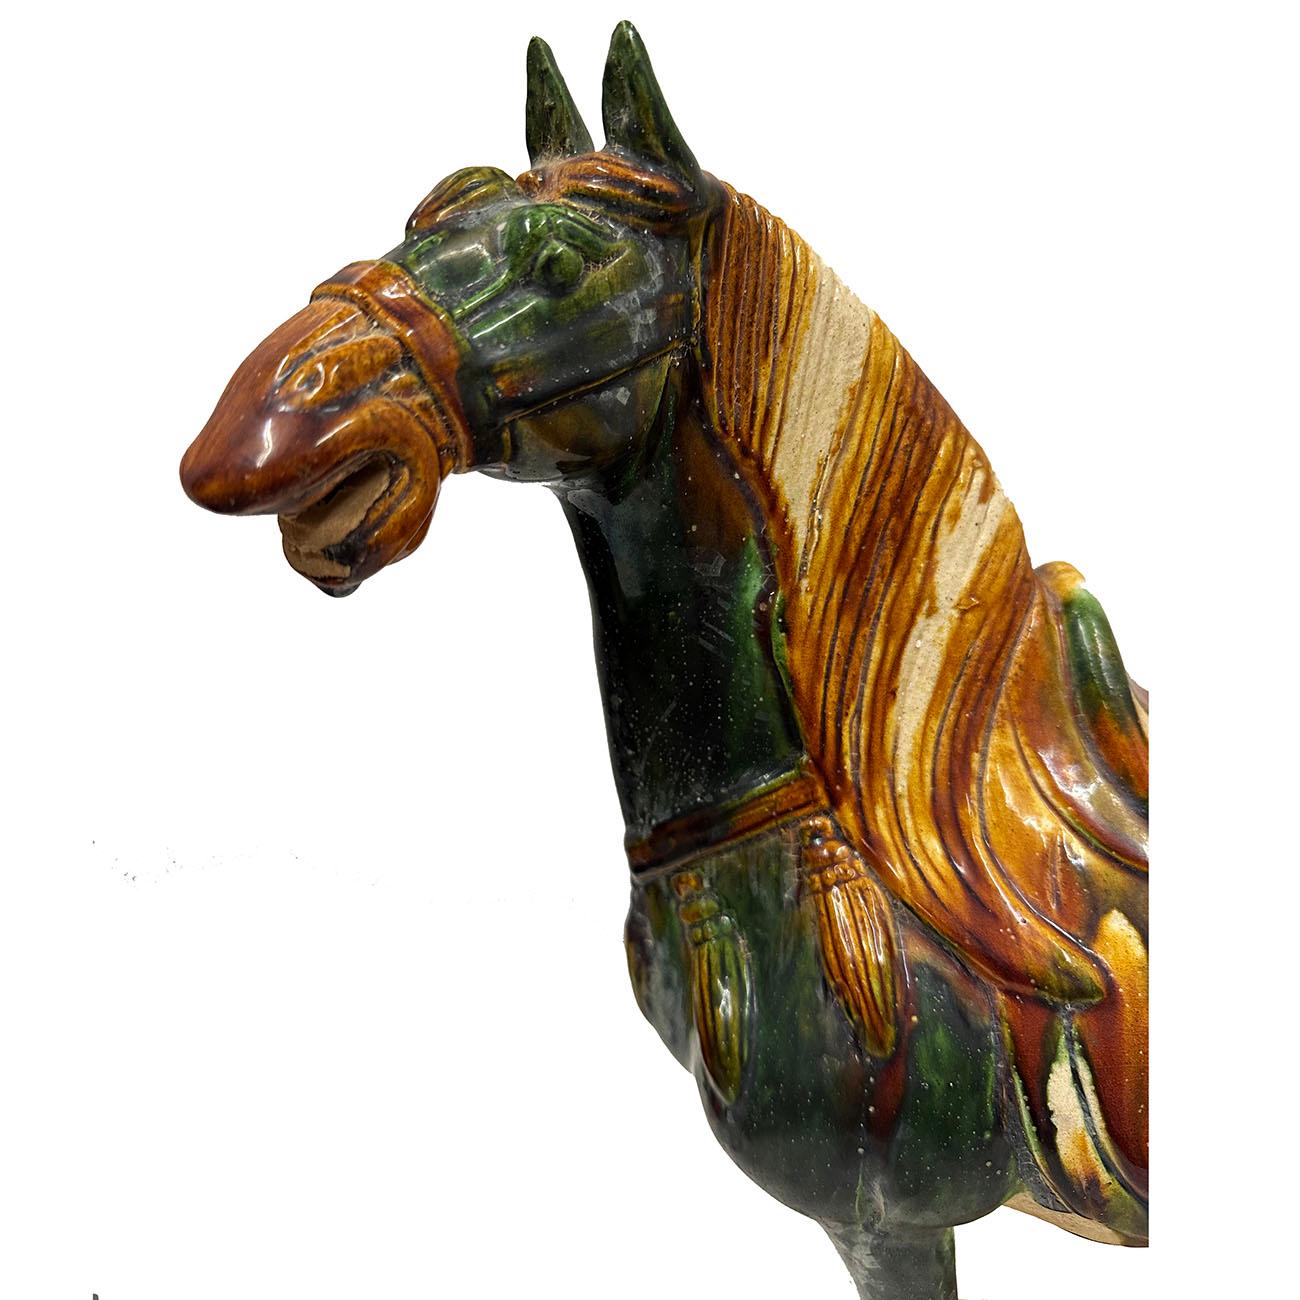 A large vintage Tang style Sancai glazed terracotta horse. This exquisite piece features a striking green and brown color glazed finish, infusing it with a touch of classic allure.
The production process of Tang Sancai is very complicated. First of